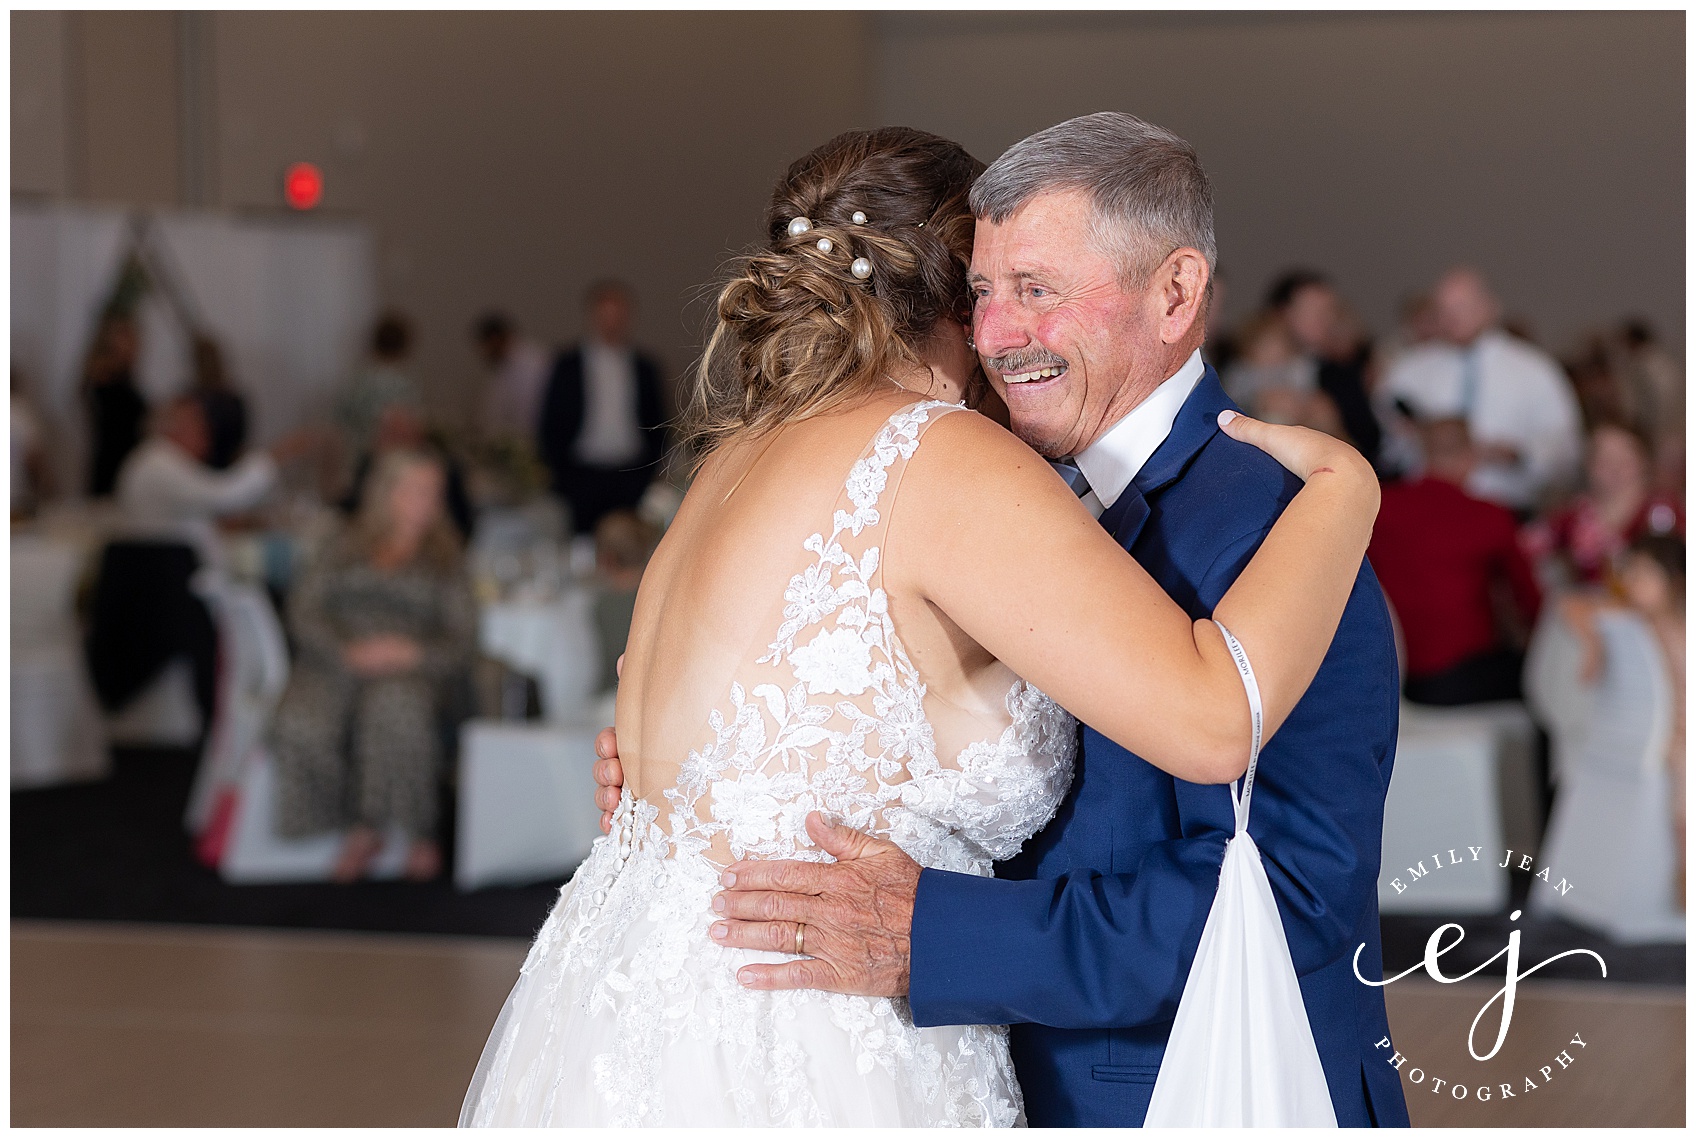 father daughter dance at wedding reception at la crosse center